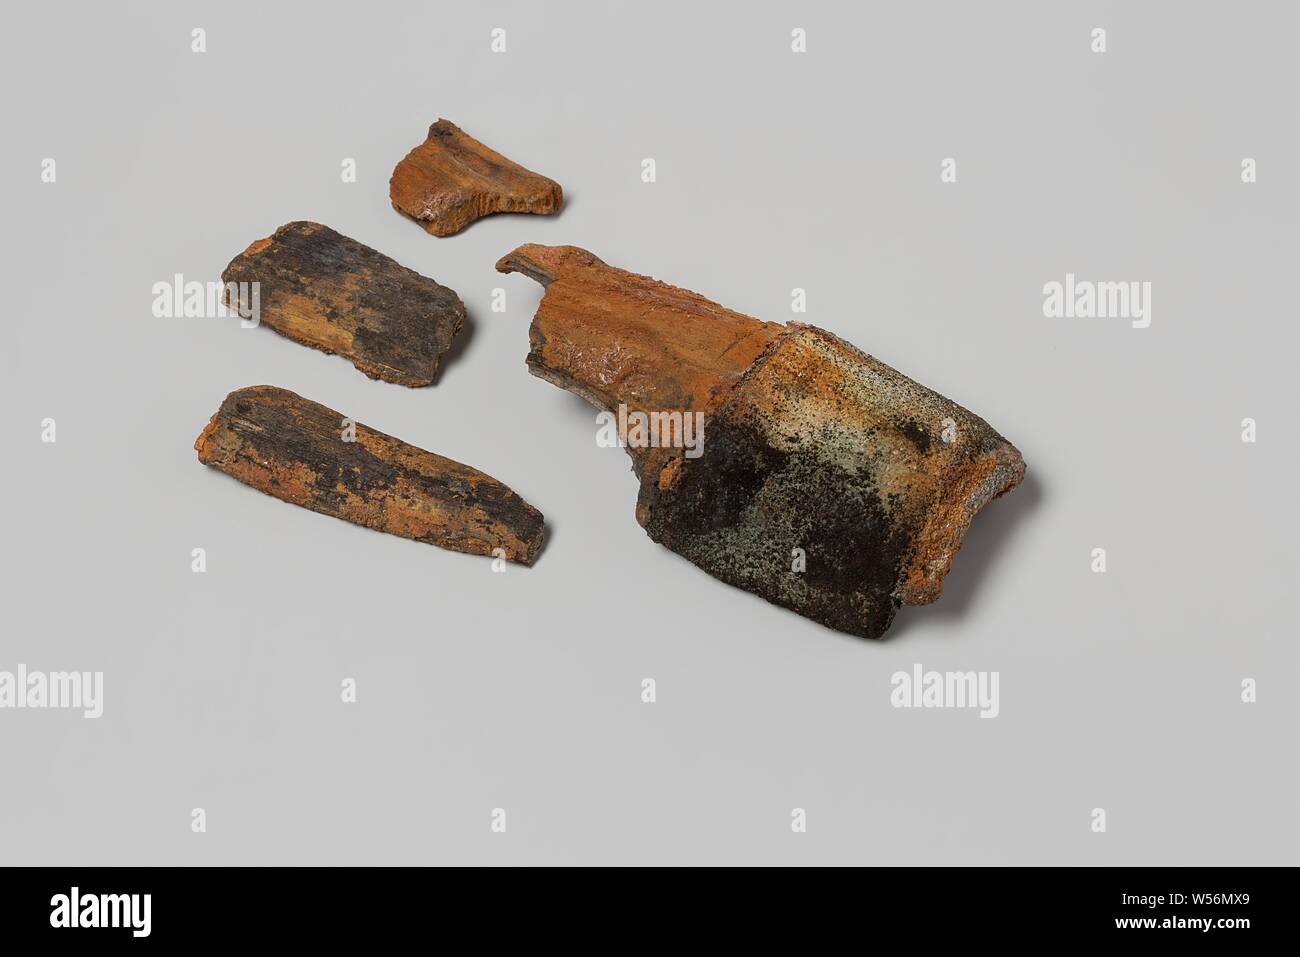 Fragment of a musket from the wreck of the East Indies sailor 't Vliegend Hart, who died in 1735. The semi-circular piece of (coniferous) wood was probably part of a musket (stick band), Dutch East India Company ' t Vliegend Hart (ship), 1700 - 1735, wood (plant material), metal, h 7.1 cm × w 3.5 cm × d 1.6 cm × h 2.1 cm × w 1.4 cm × d 0.5 cm Stock Photo